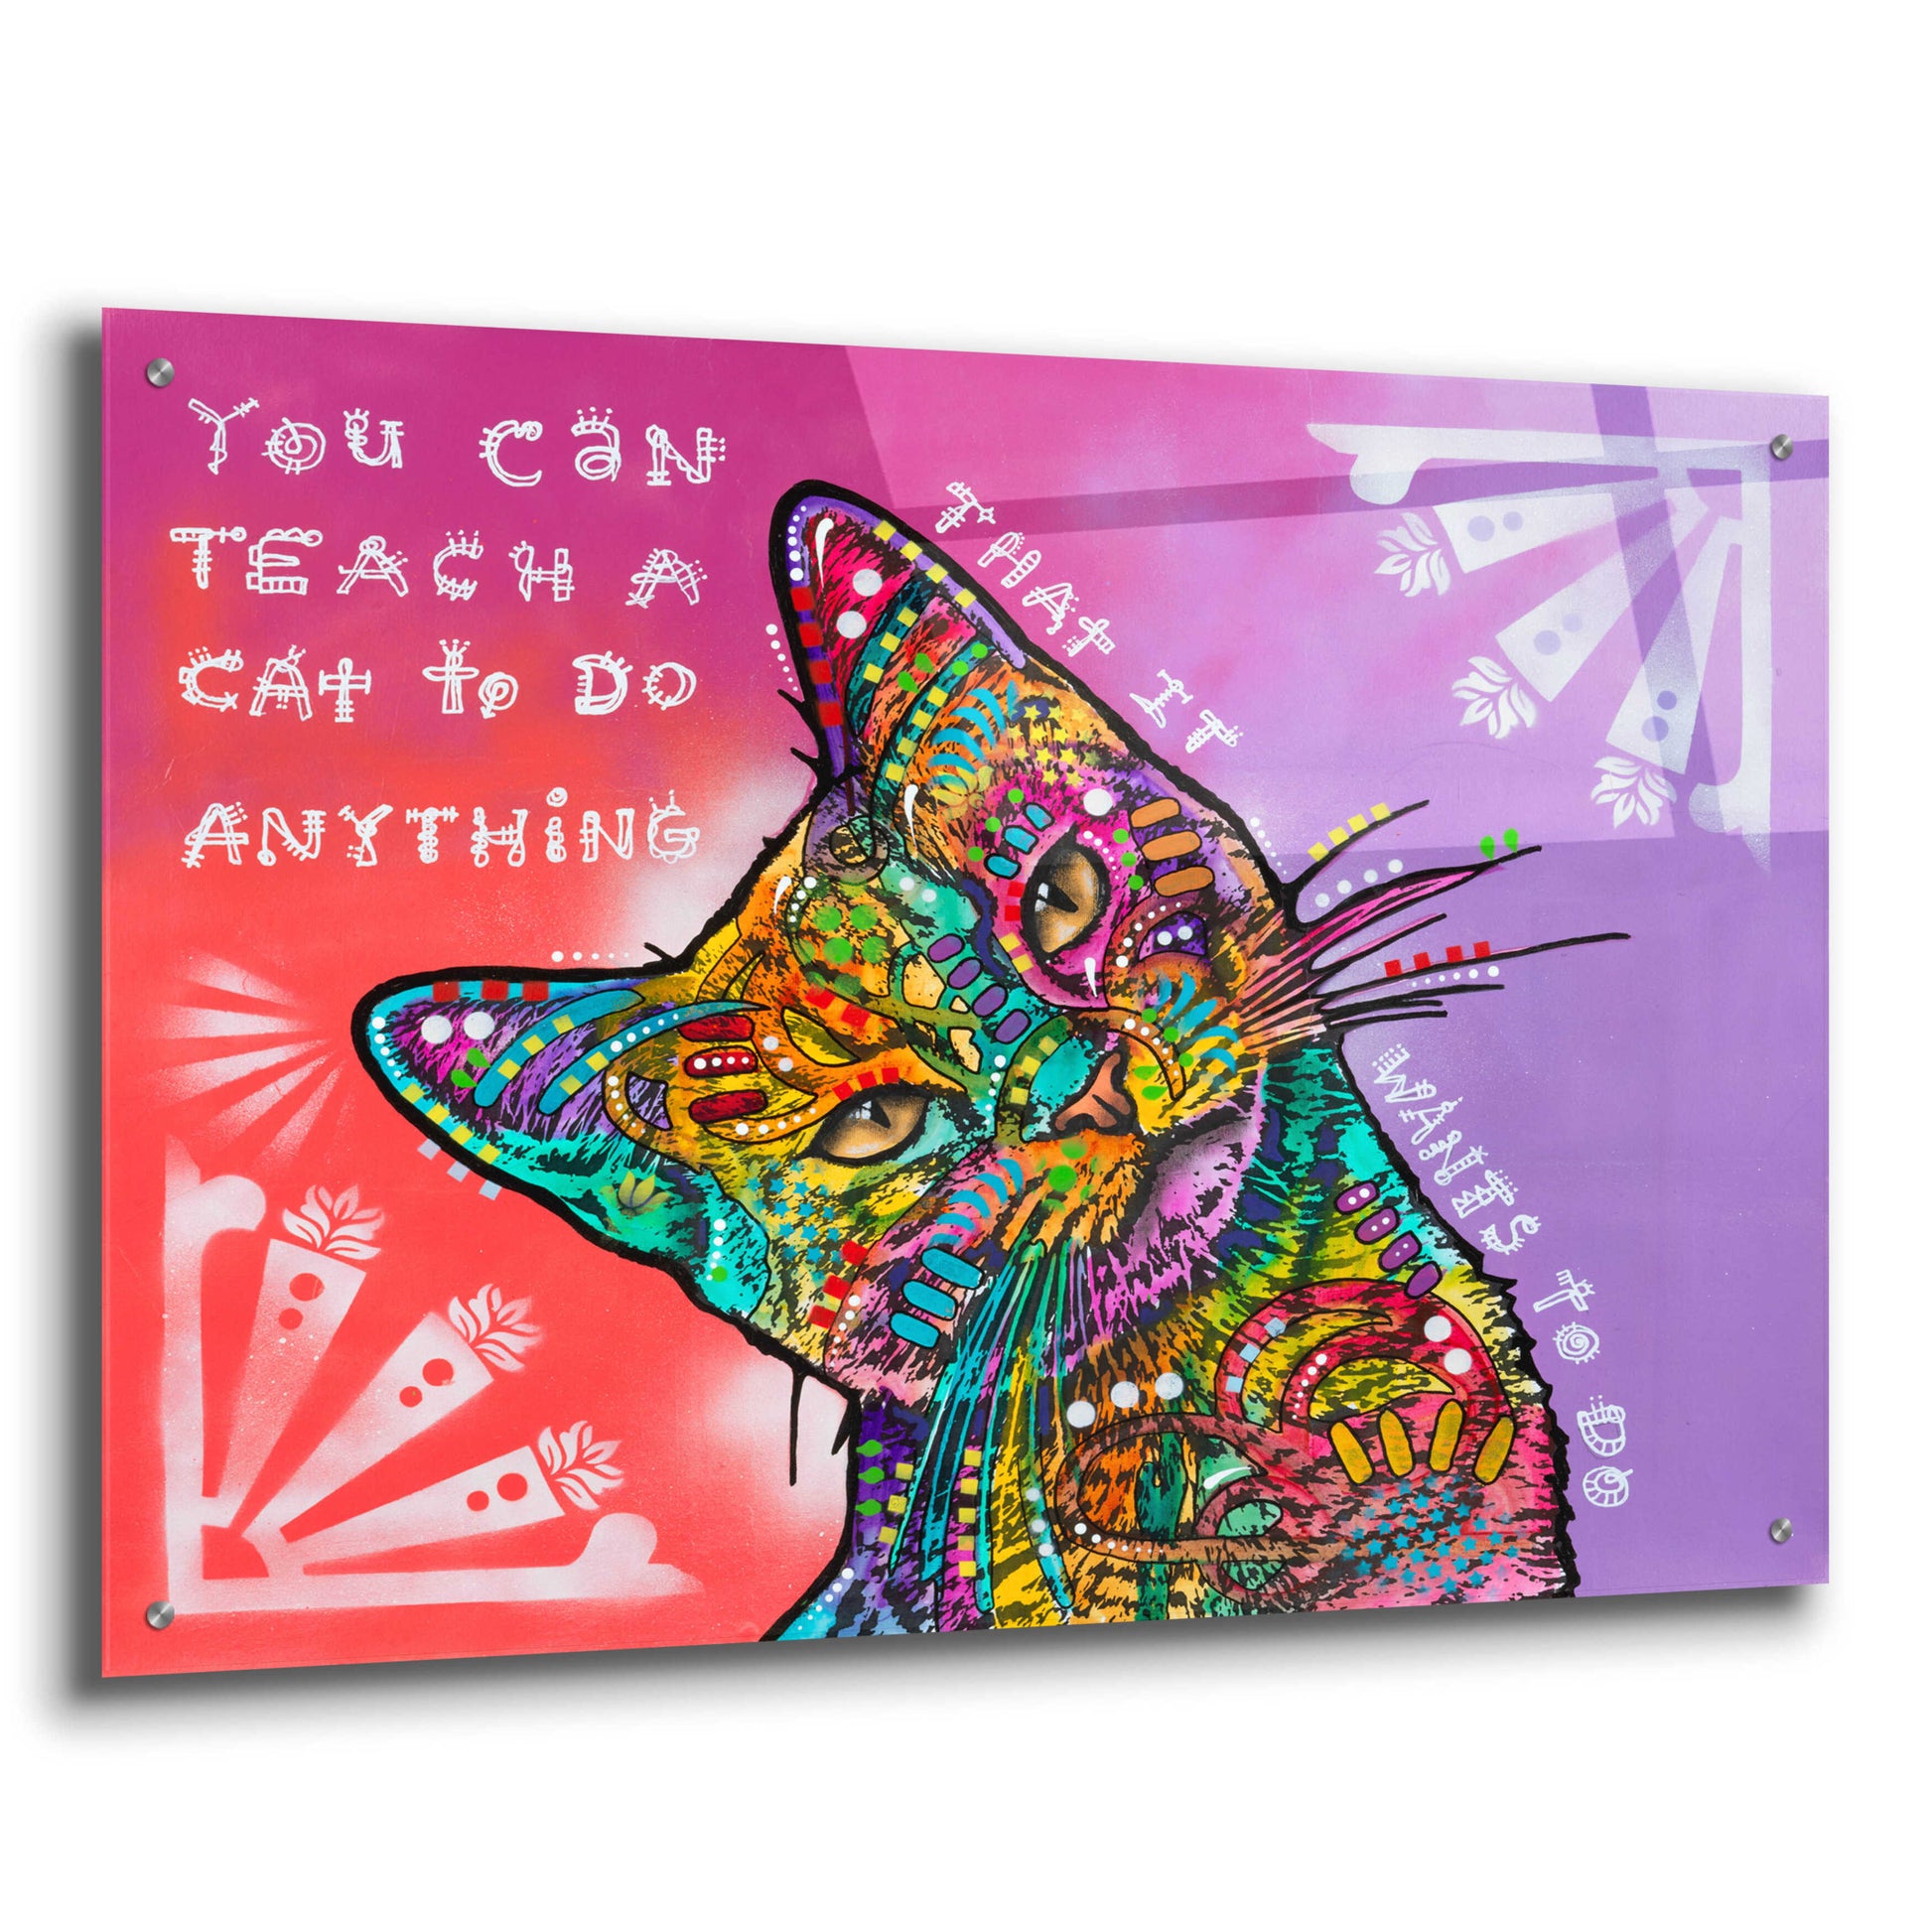 Epic Art 'You can teach a cat' by Dean Russo, Acrylic Glass Wall Art,36x24